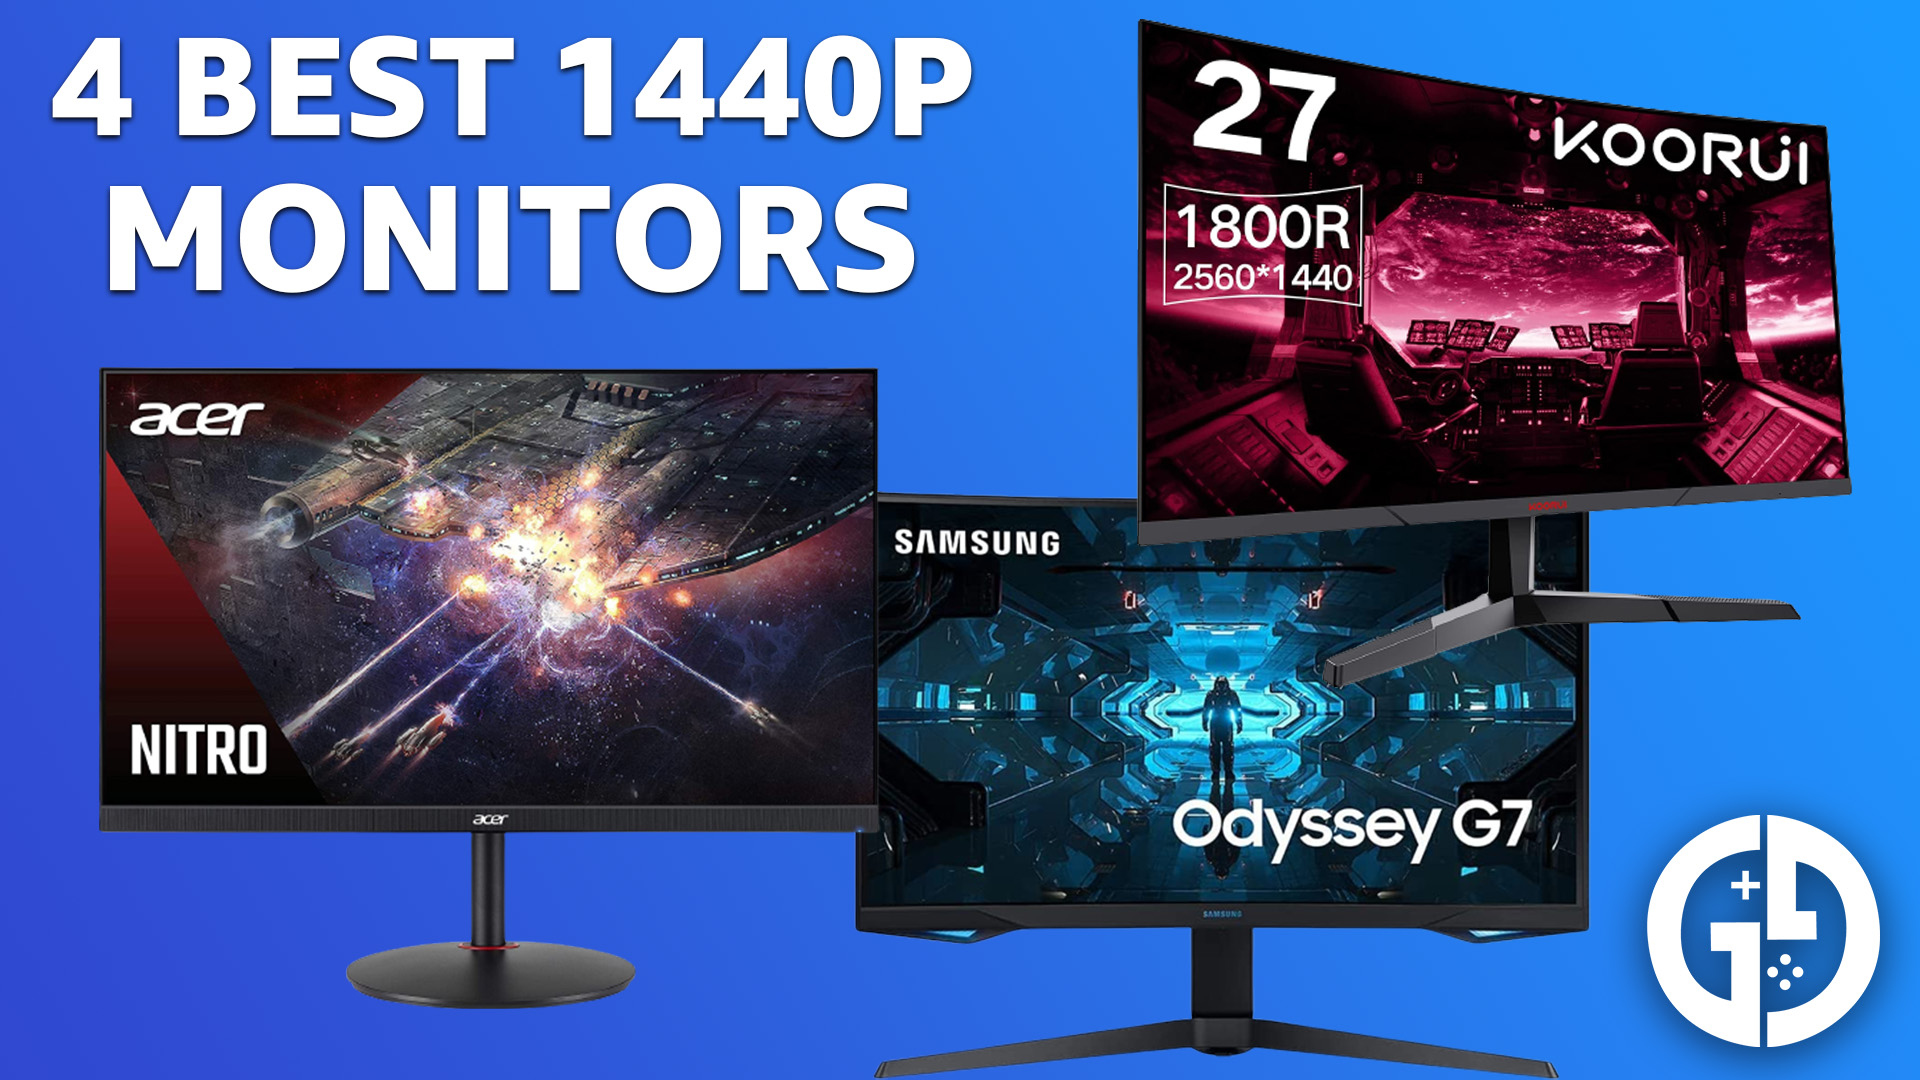 4 best 1440p gaming monitors in 2023 Highend and budget models